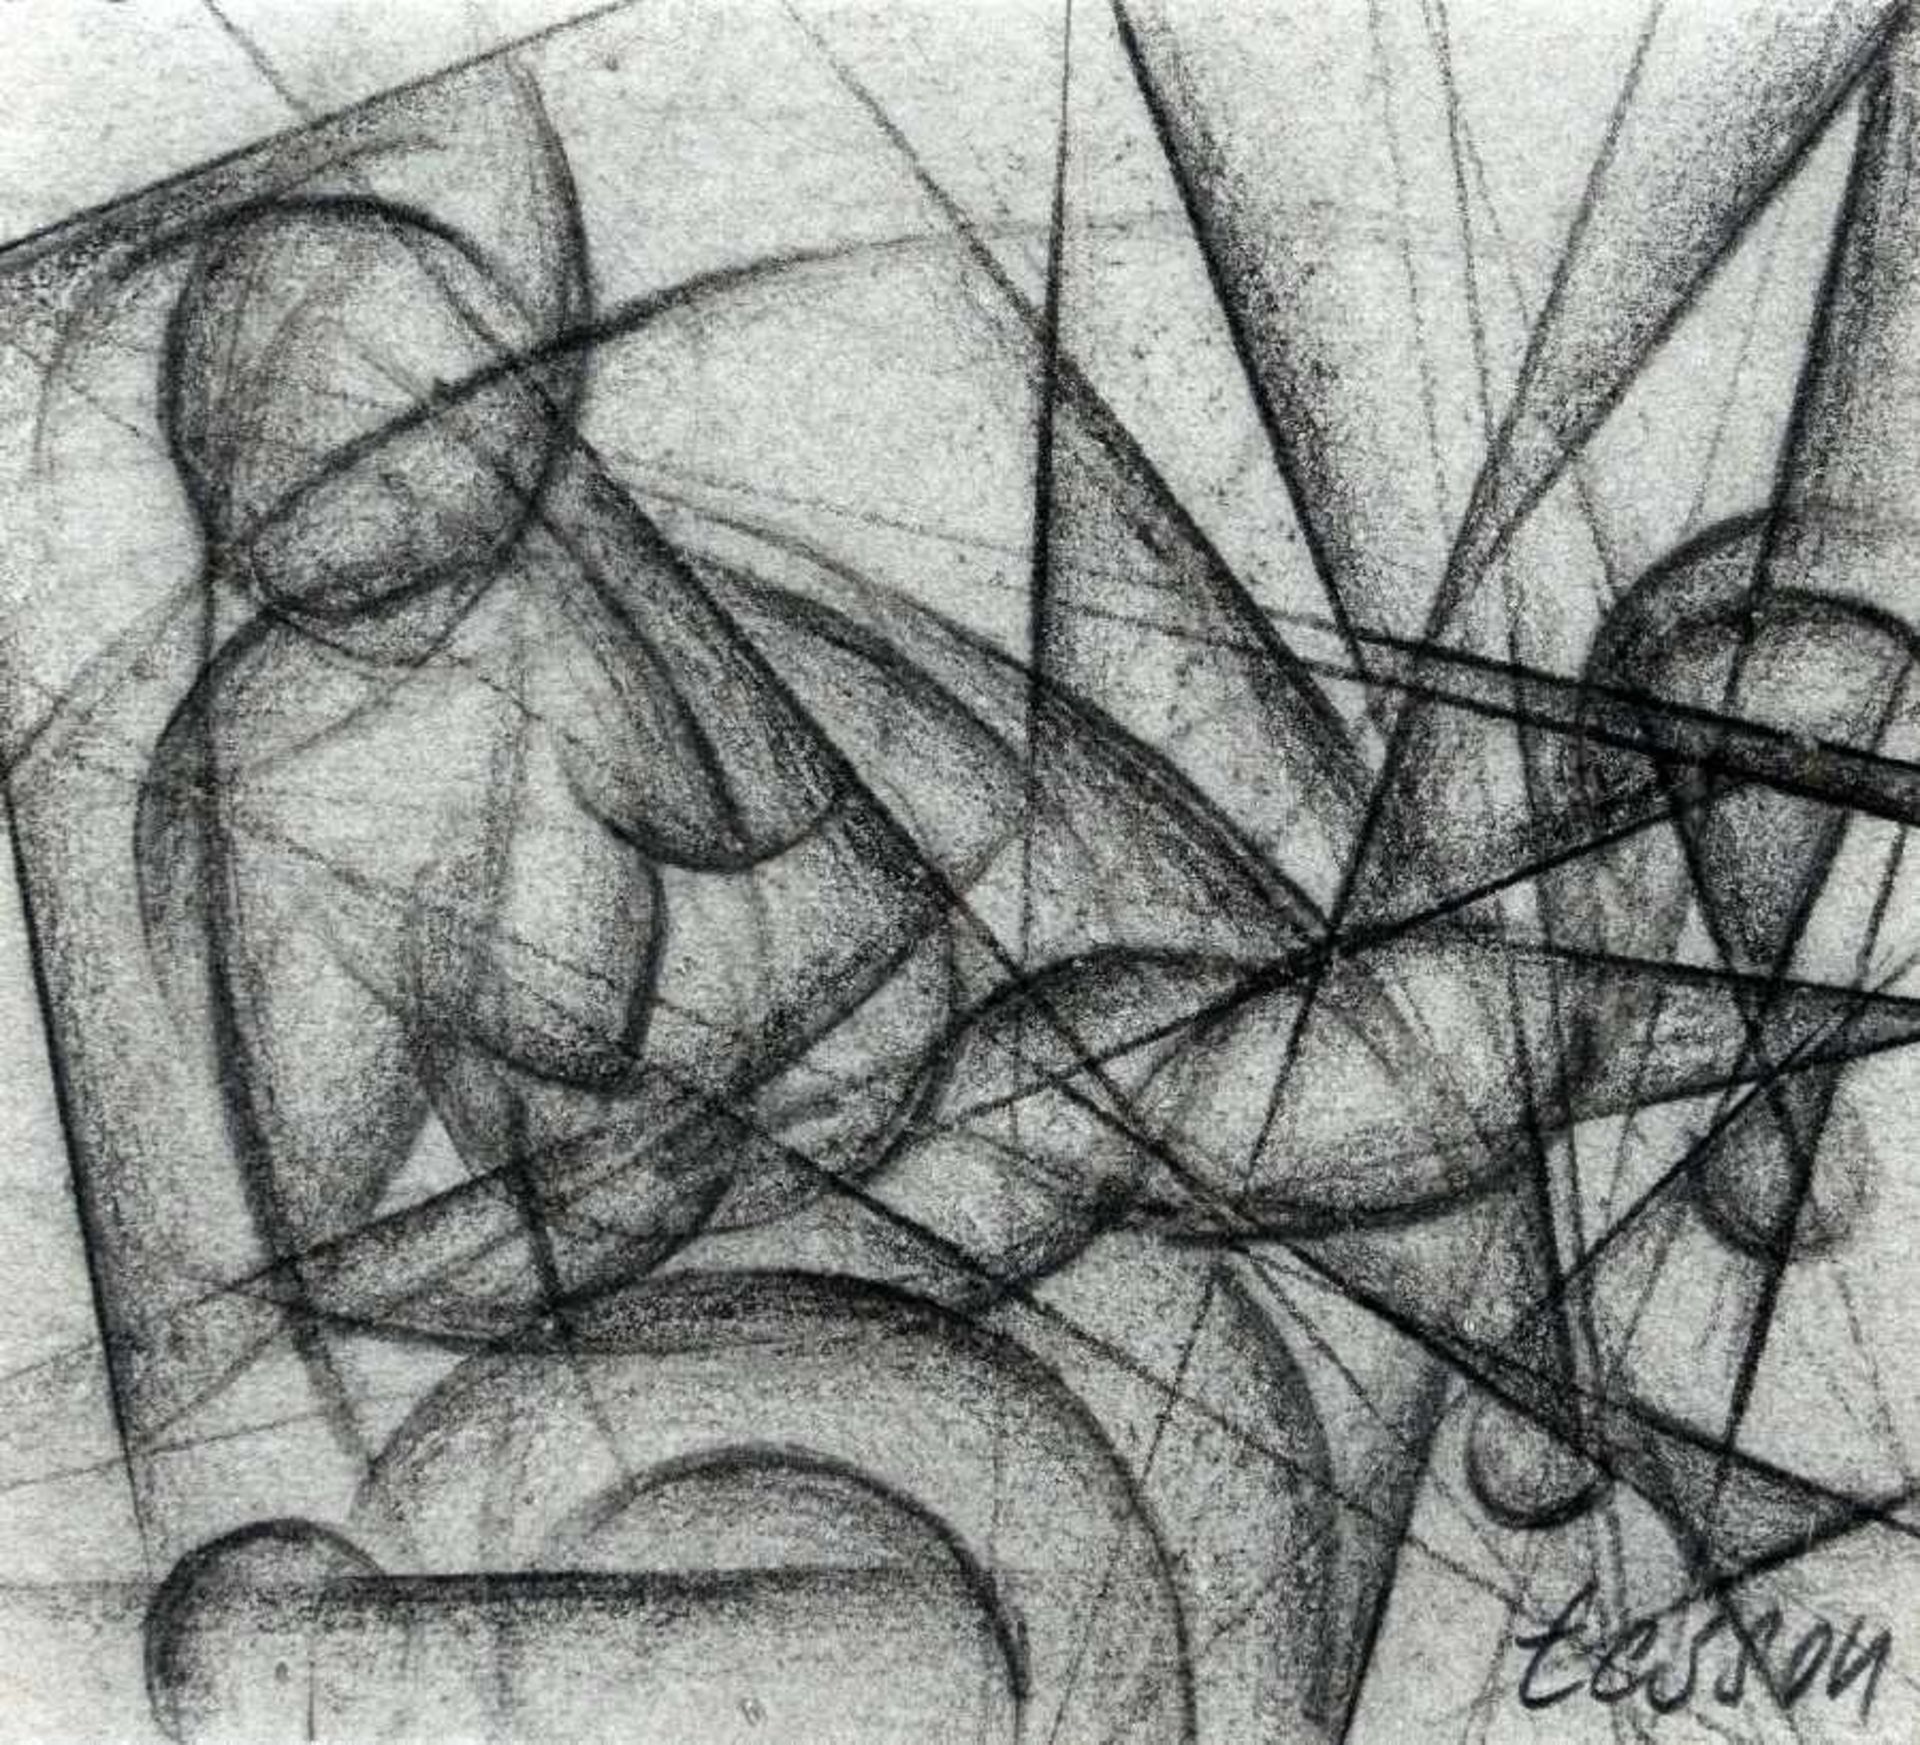 Georges TessonCubist of the first half of the 20th centuryFemme nue cubistePencil drawing on